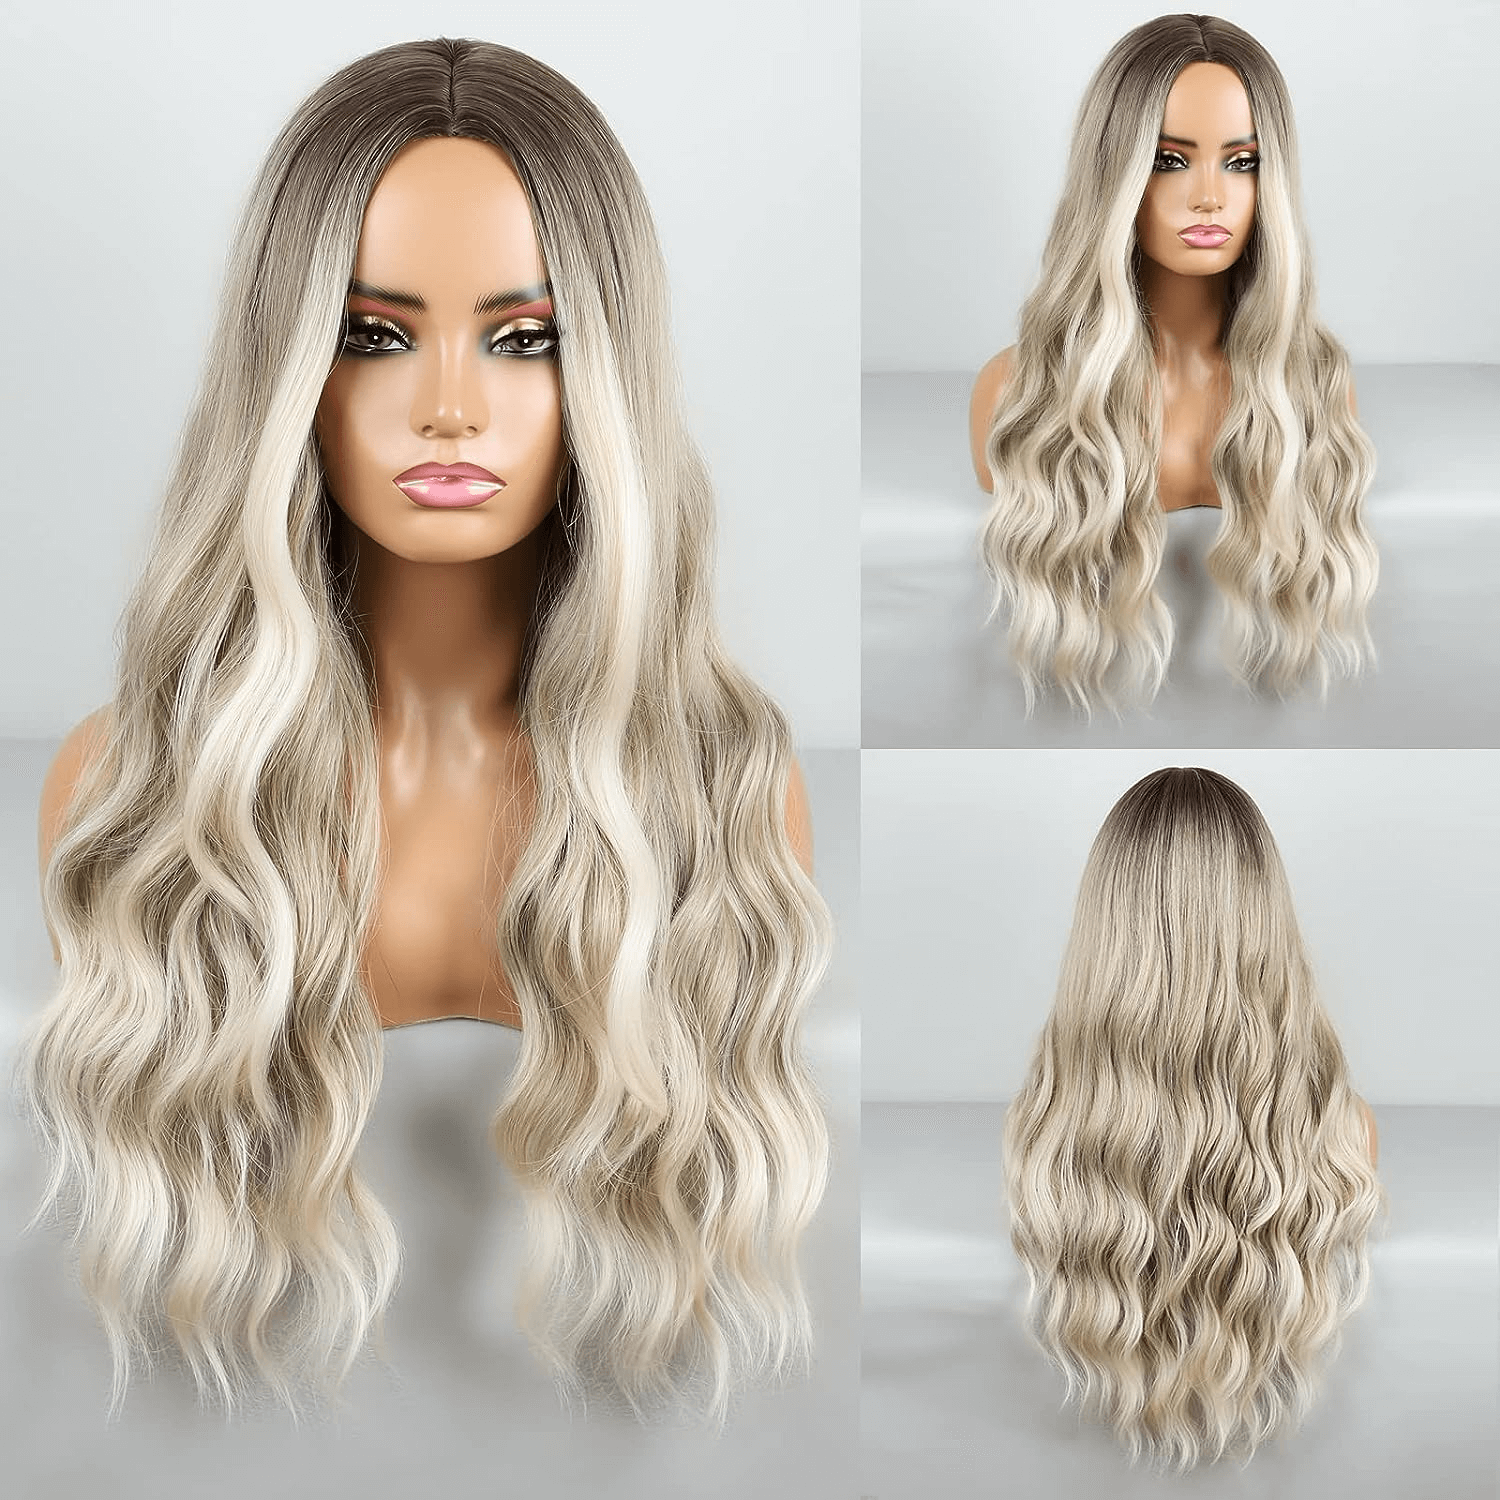 Ombre Strawberry Blonde Wig Long Wavy Wigs For Women Middle Part Wavy Wigs Synthetic Heat Resistant Party Wigs Natural looking